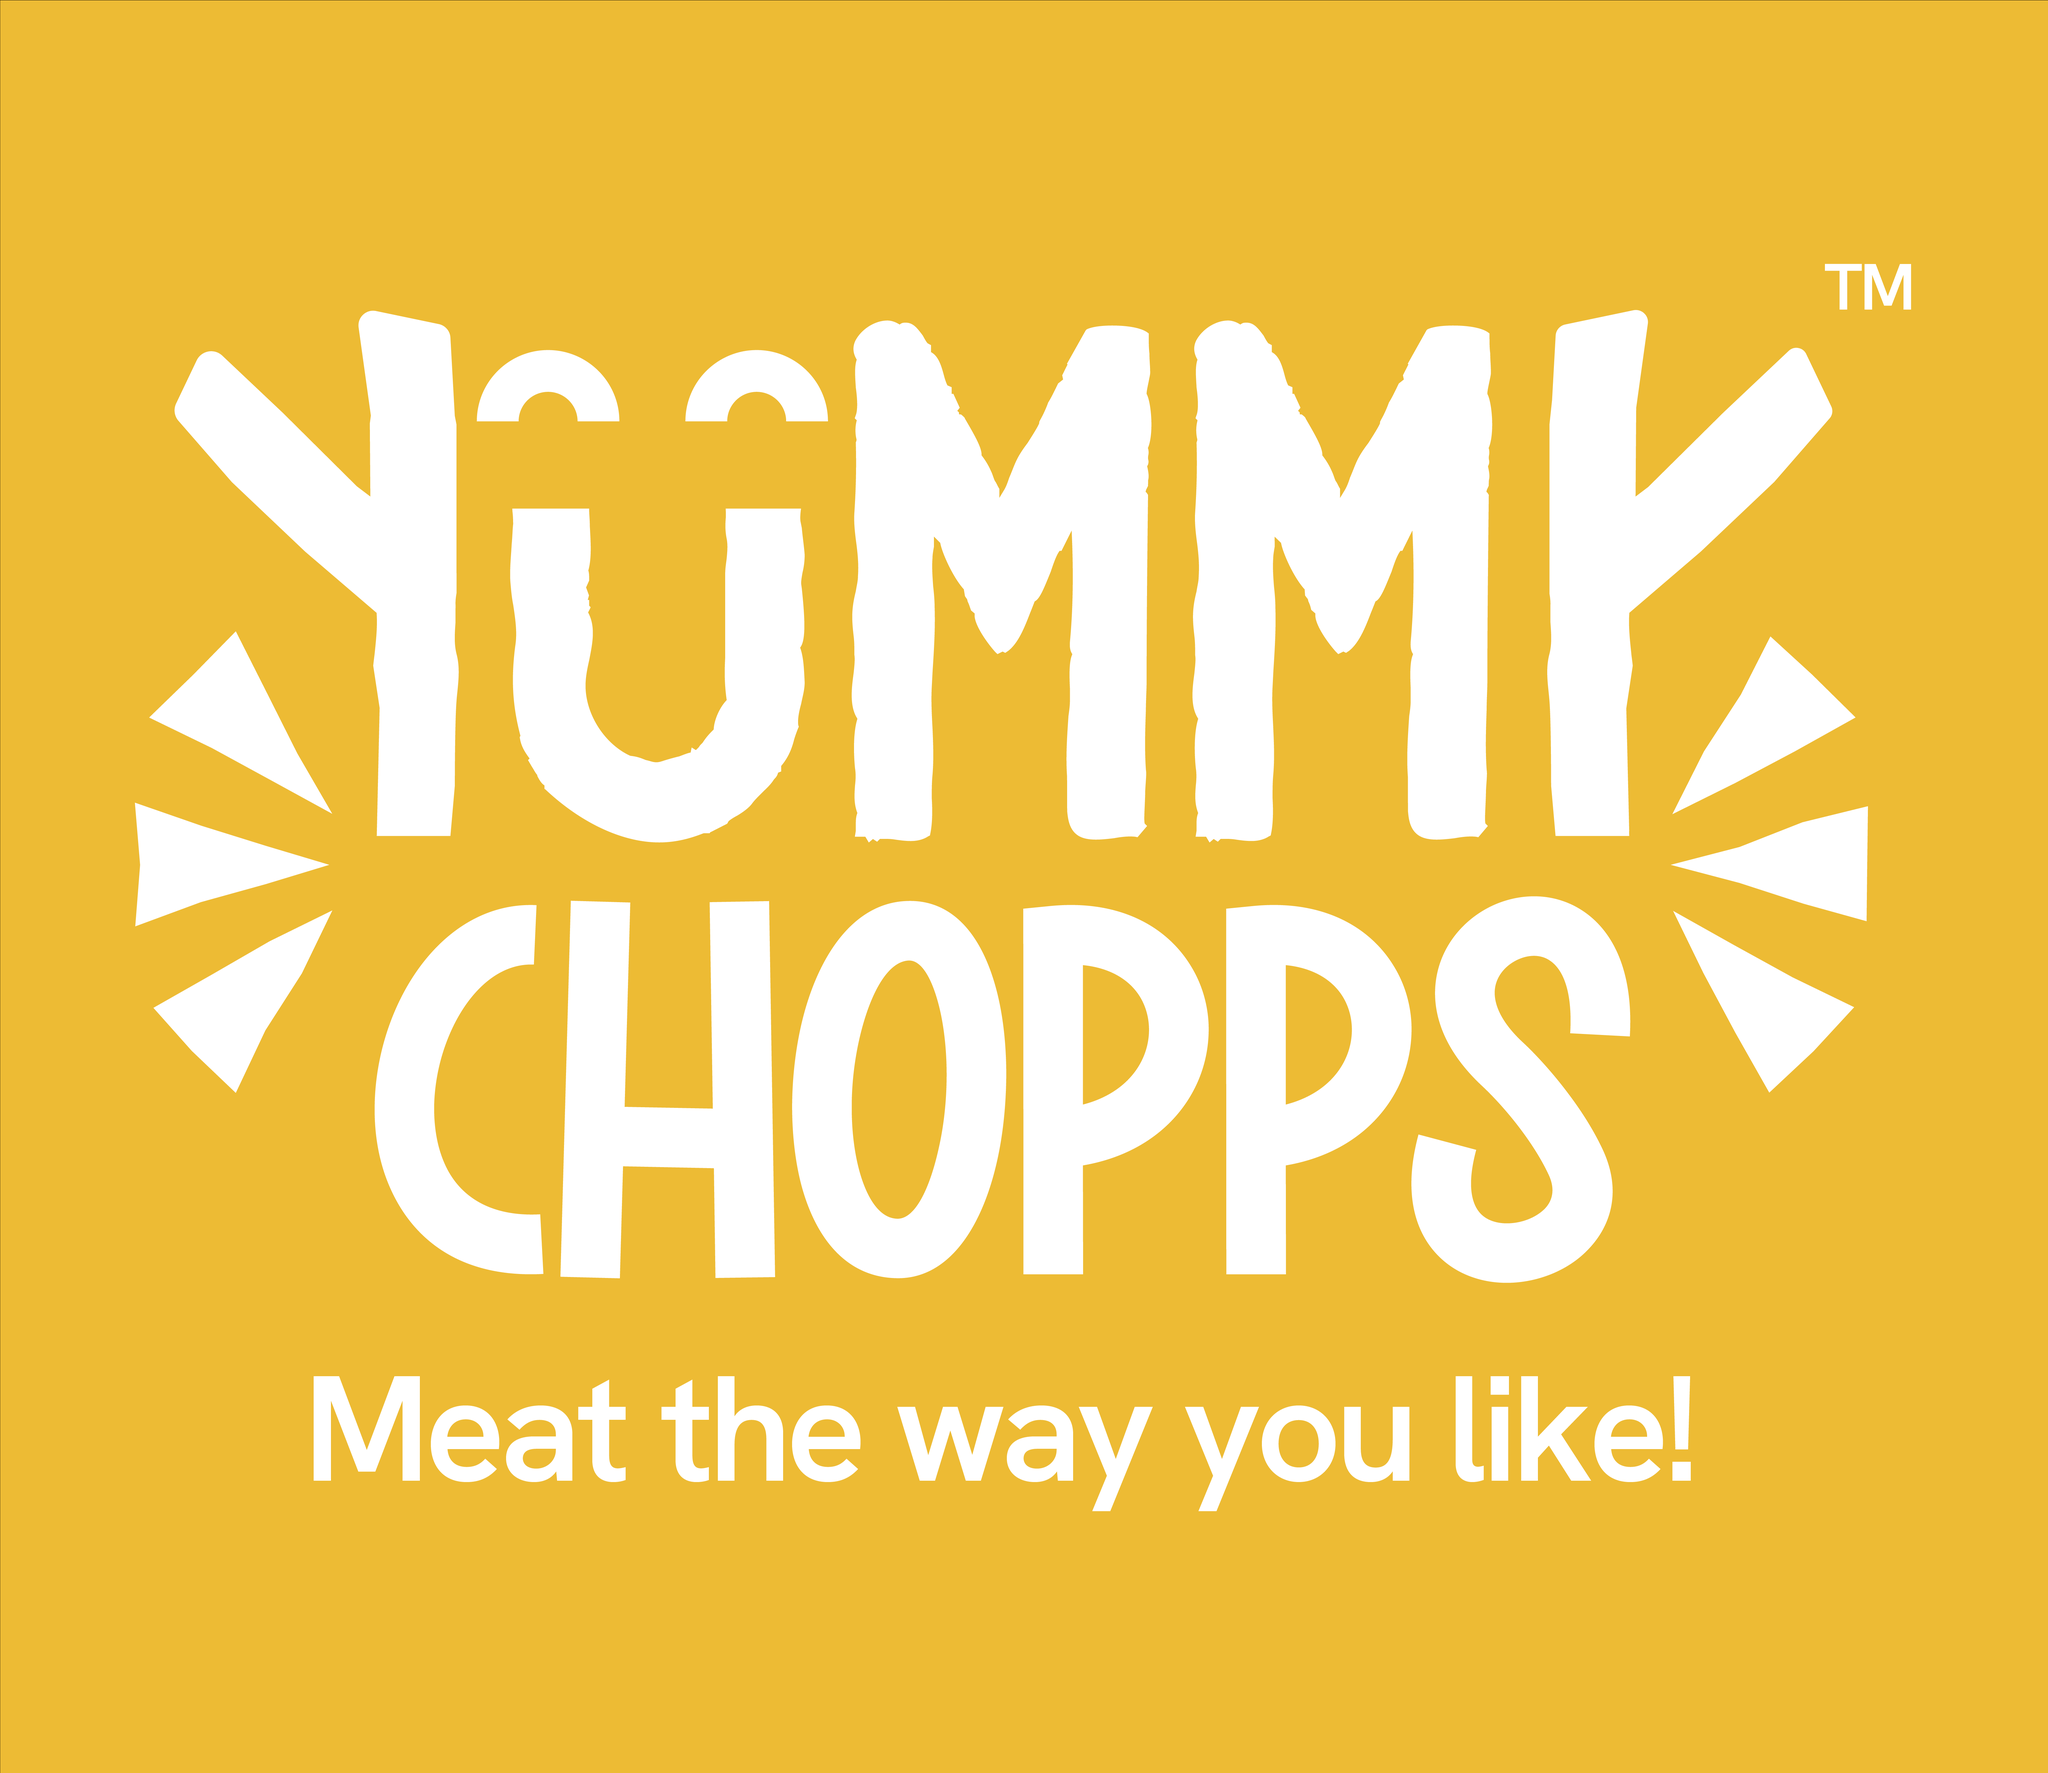 https://s3.amazonaws.com/mobileappdaily/mad/uploads/img_yummy-chops.png